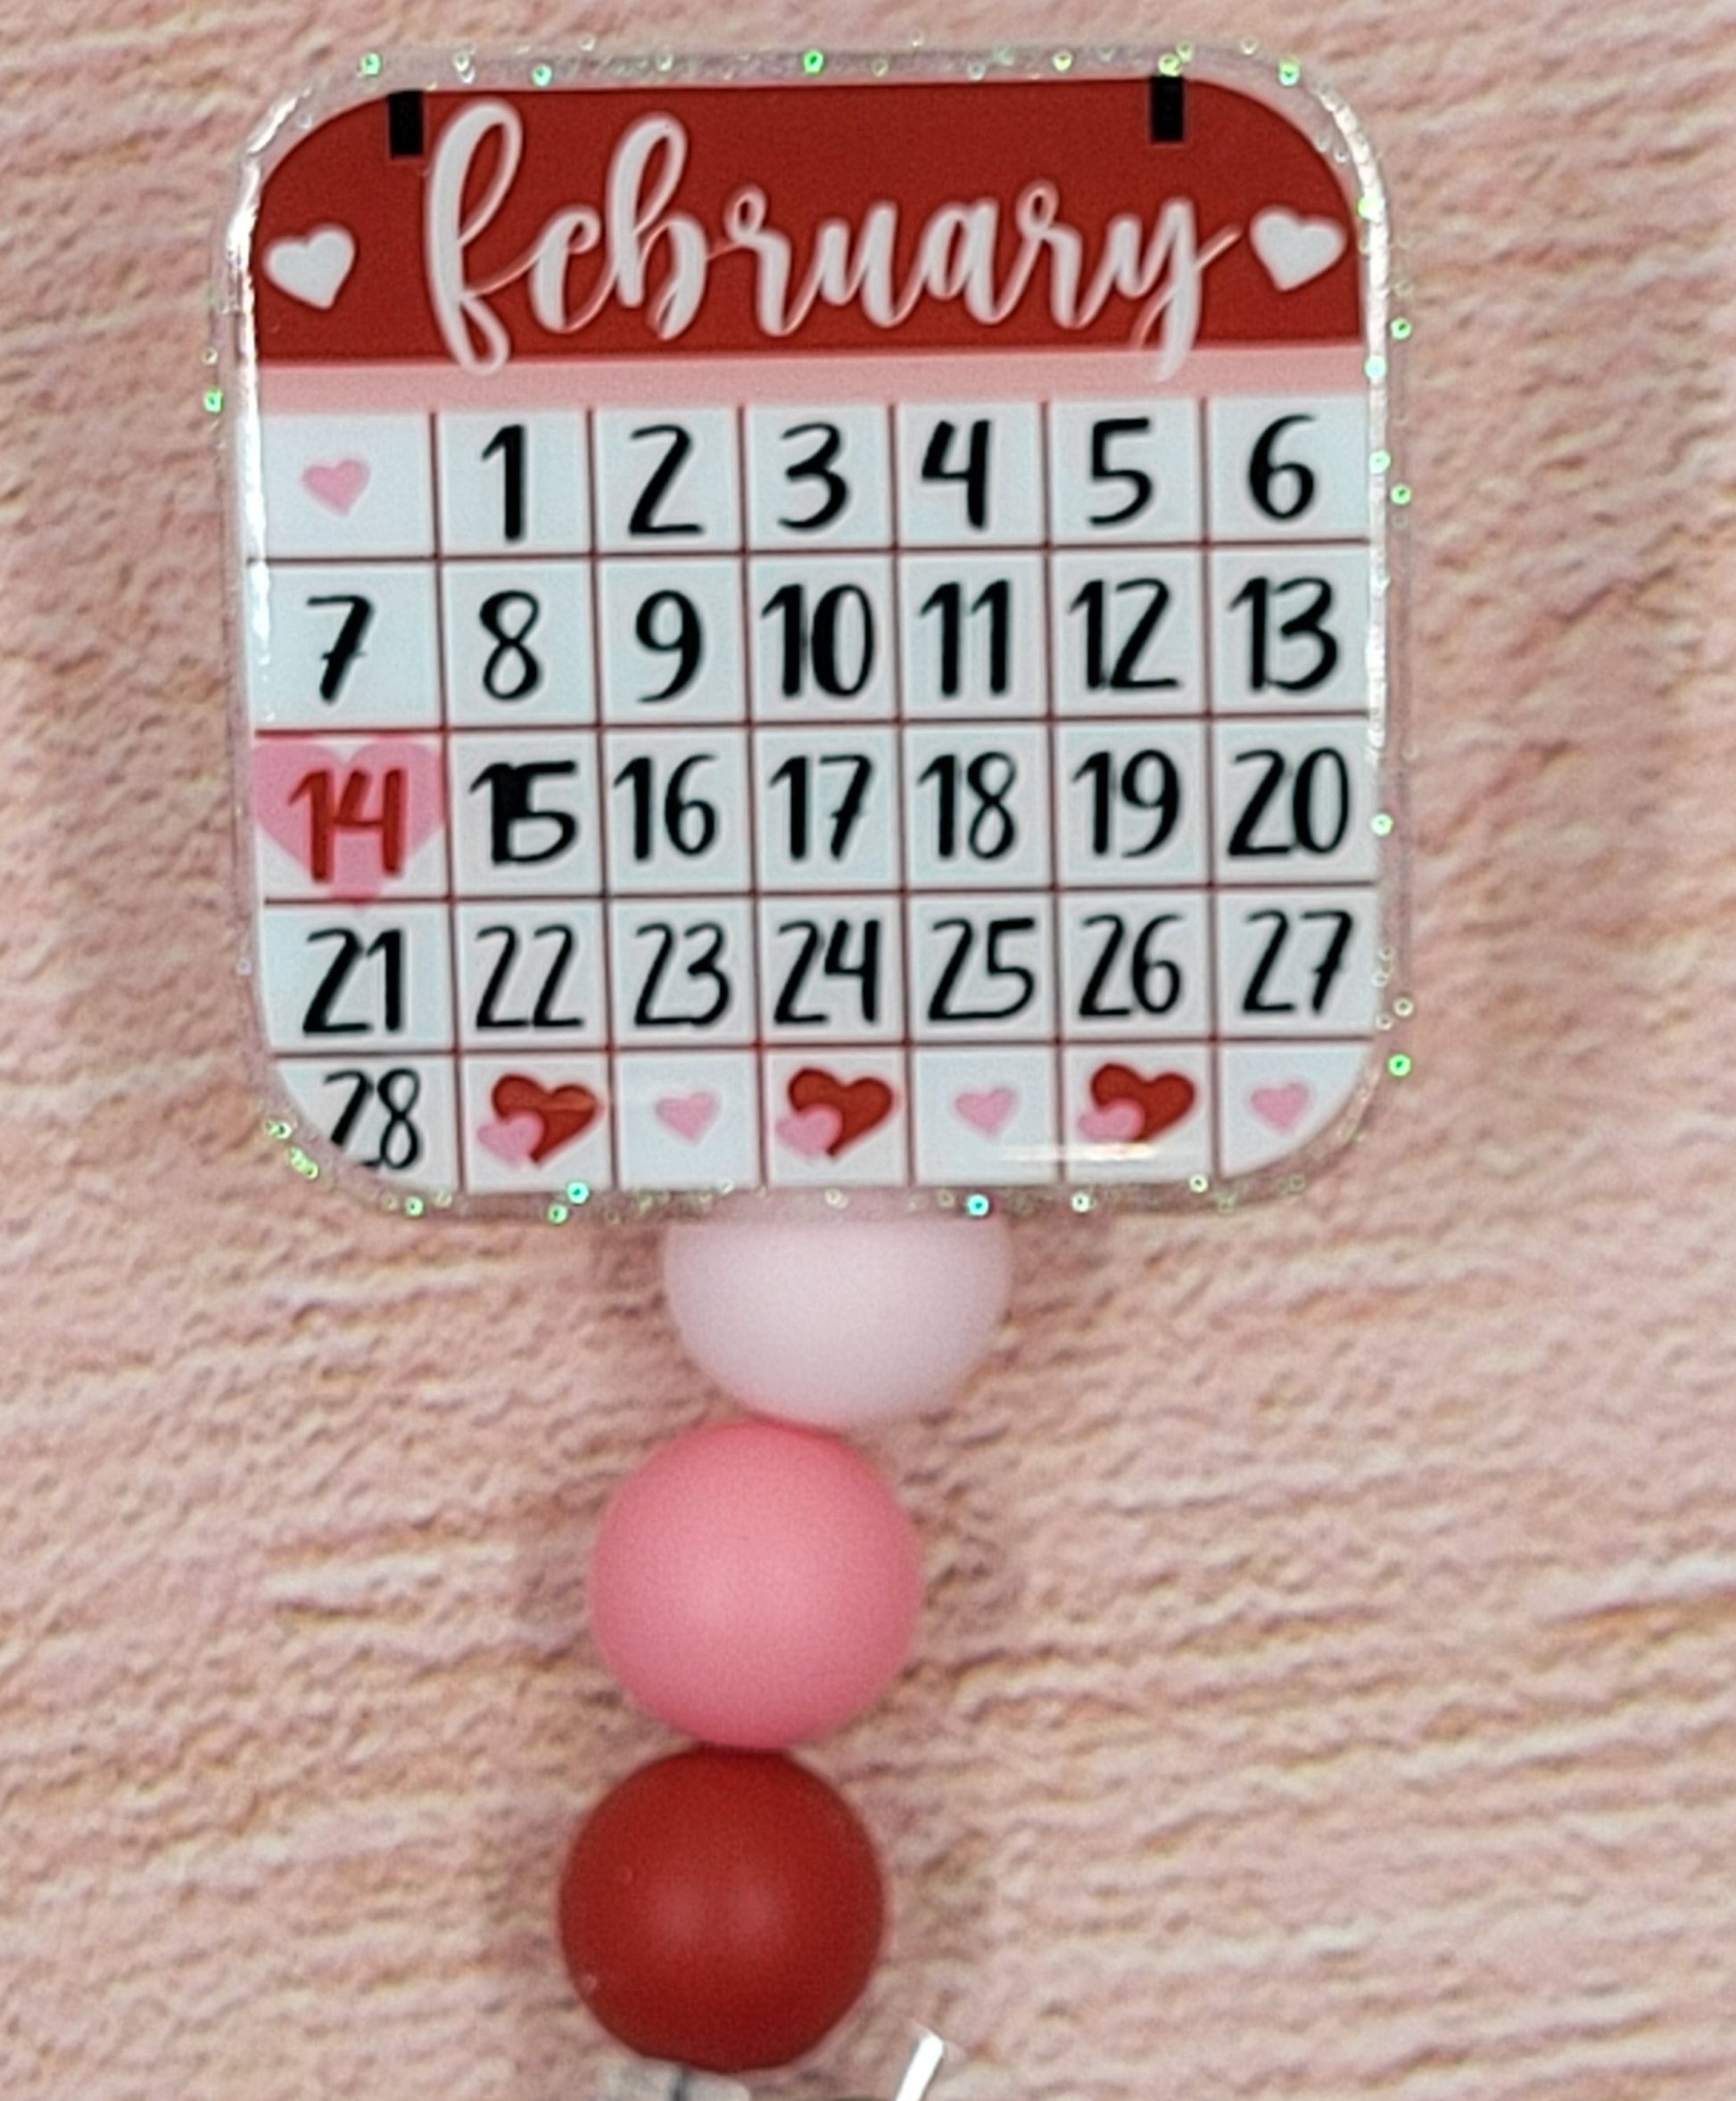 This 2" x 2" Badge Reel features a Valentines themed February Calendar in a combination of pink and red hues. Adding to its festive appeal is an iridescent glitter base, accompanied by three silicone beads in coordinated colors. Elevating your style for the holiday season, this is a must-have accessory.